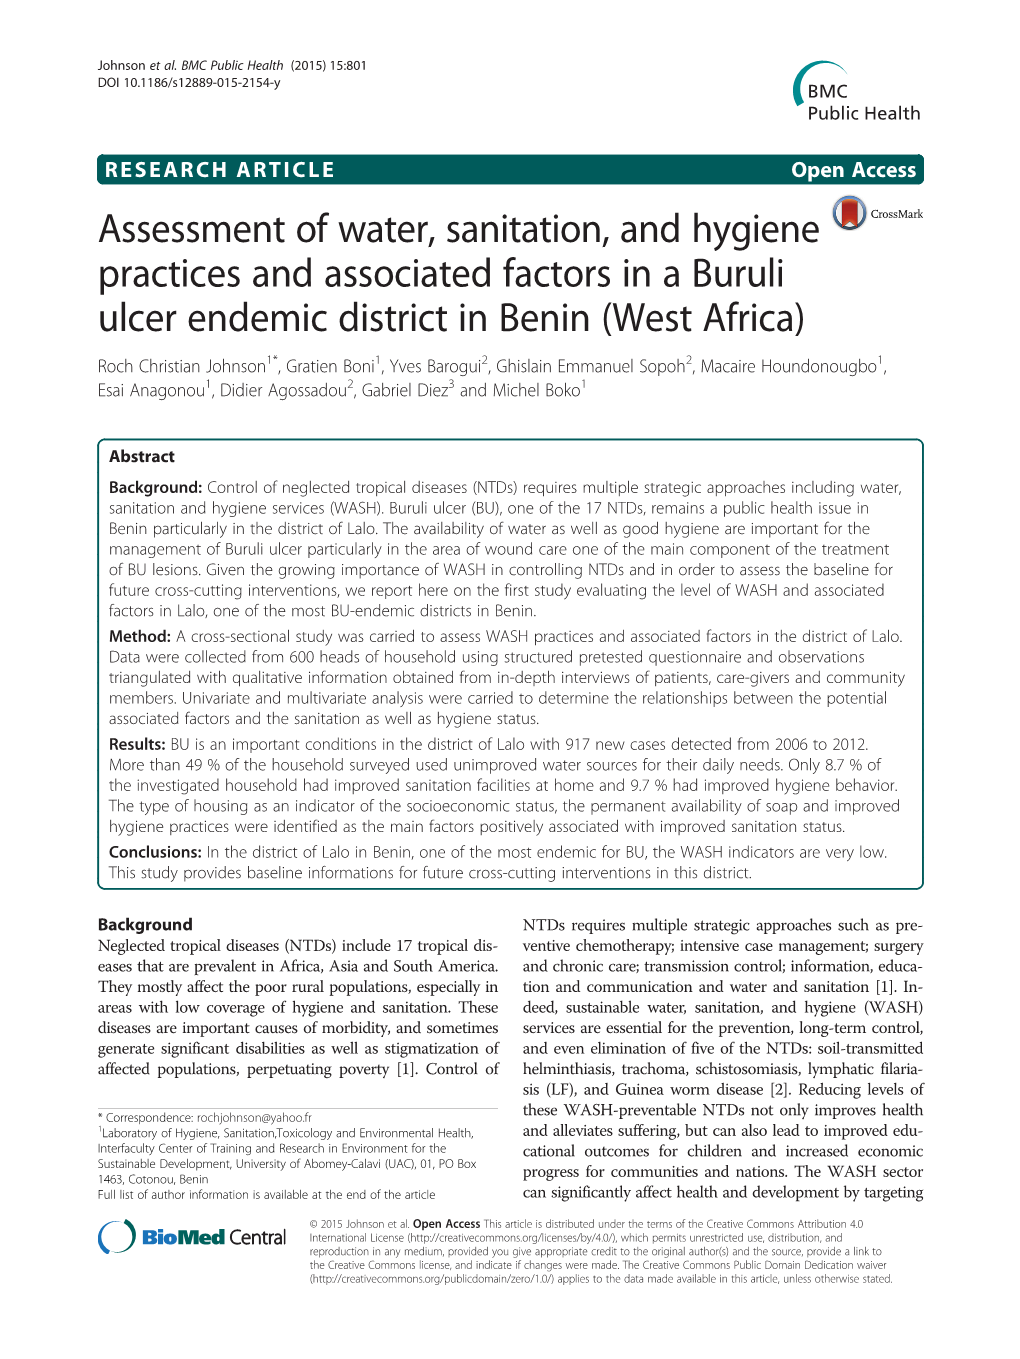 Assessment of Water, Sanitation, and Hygiene Practices and Associated